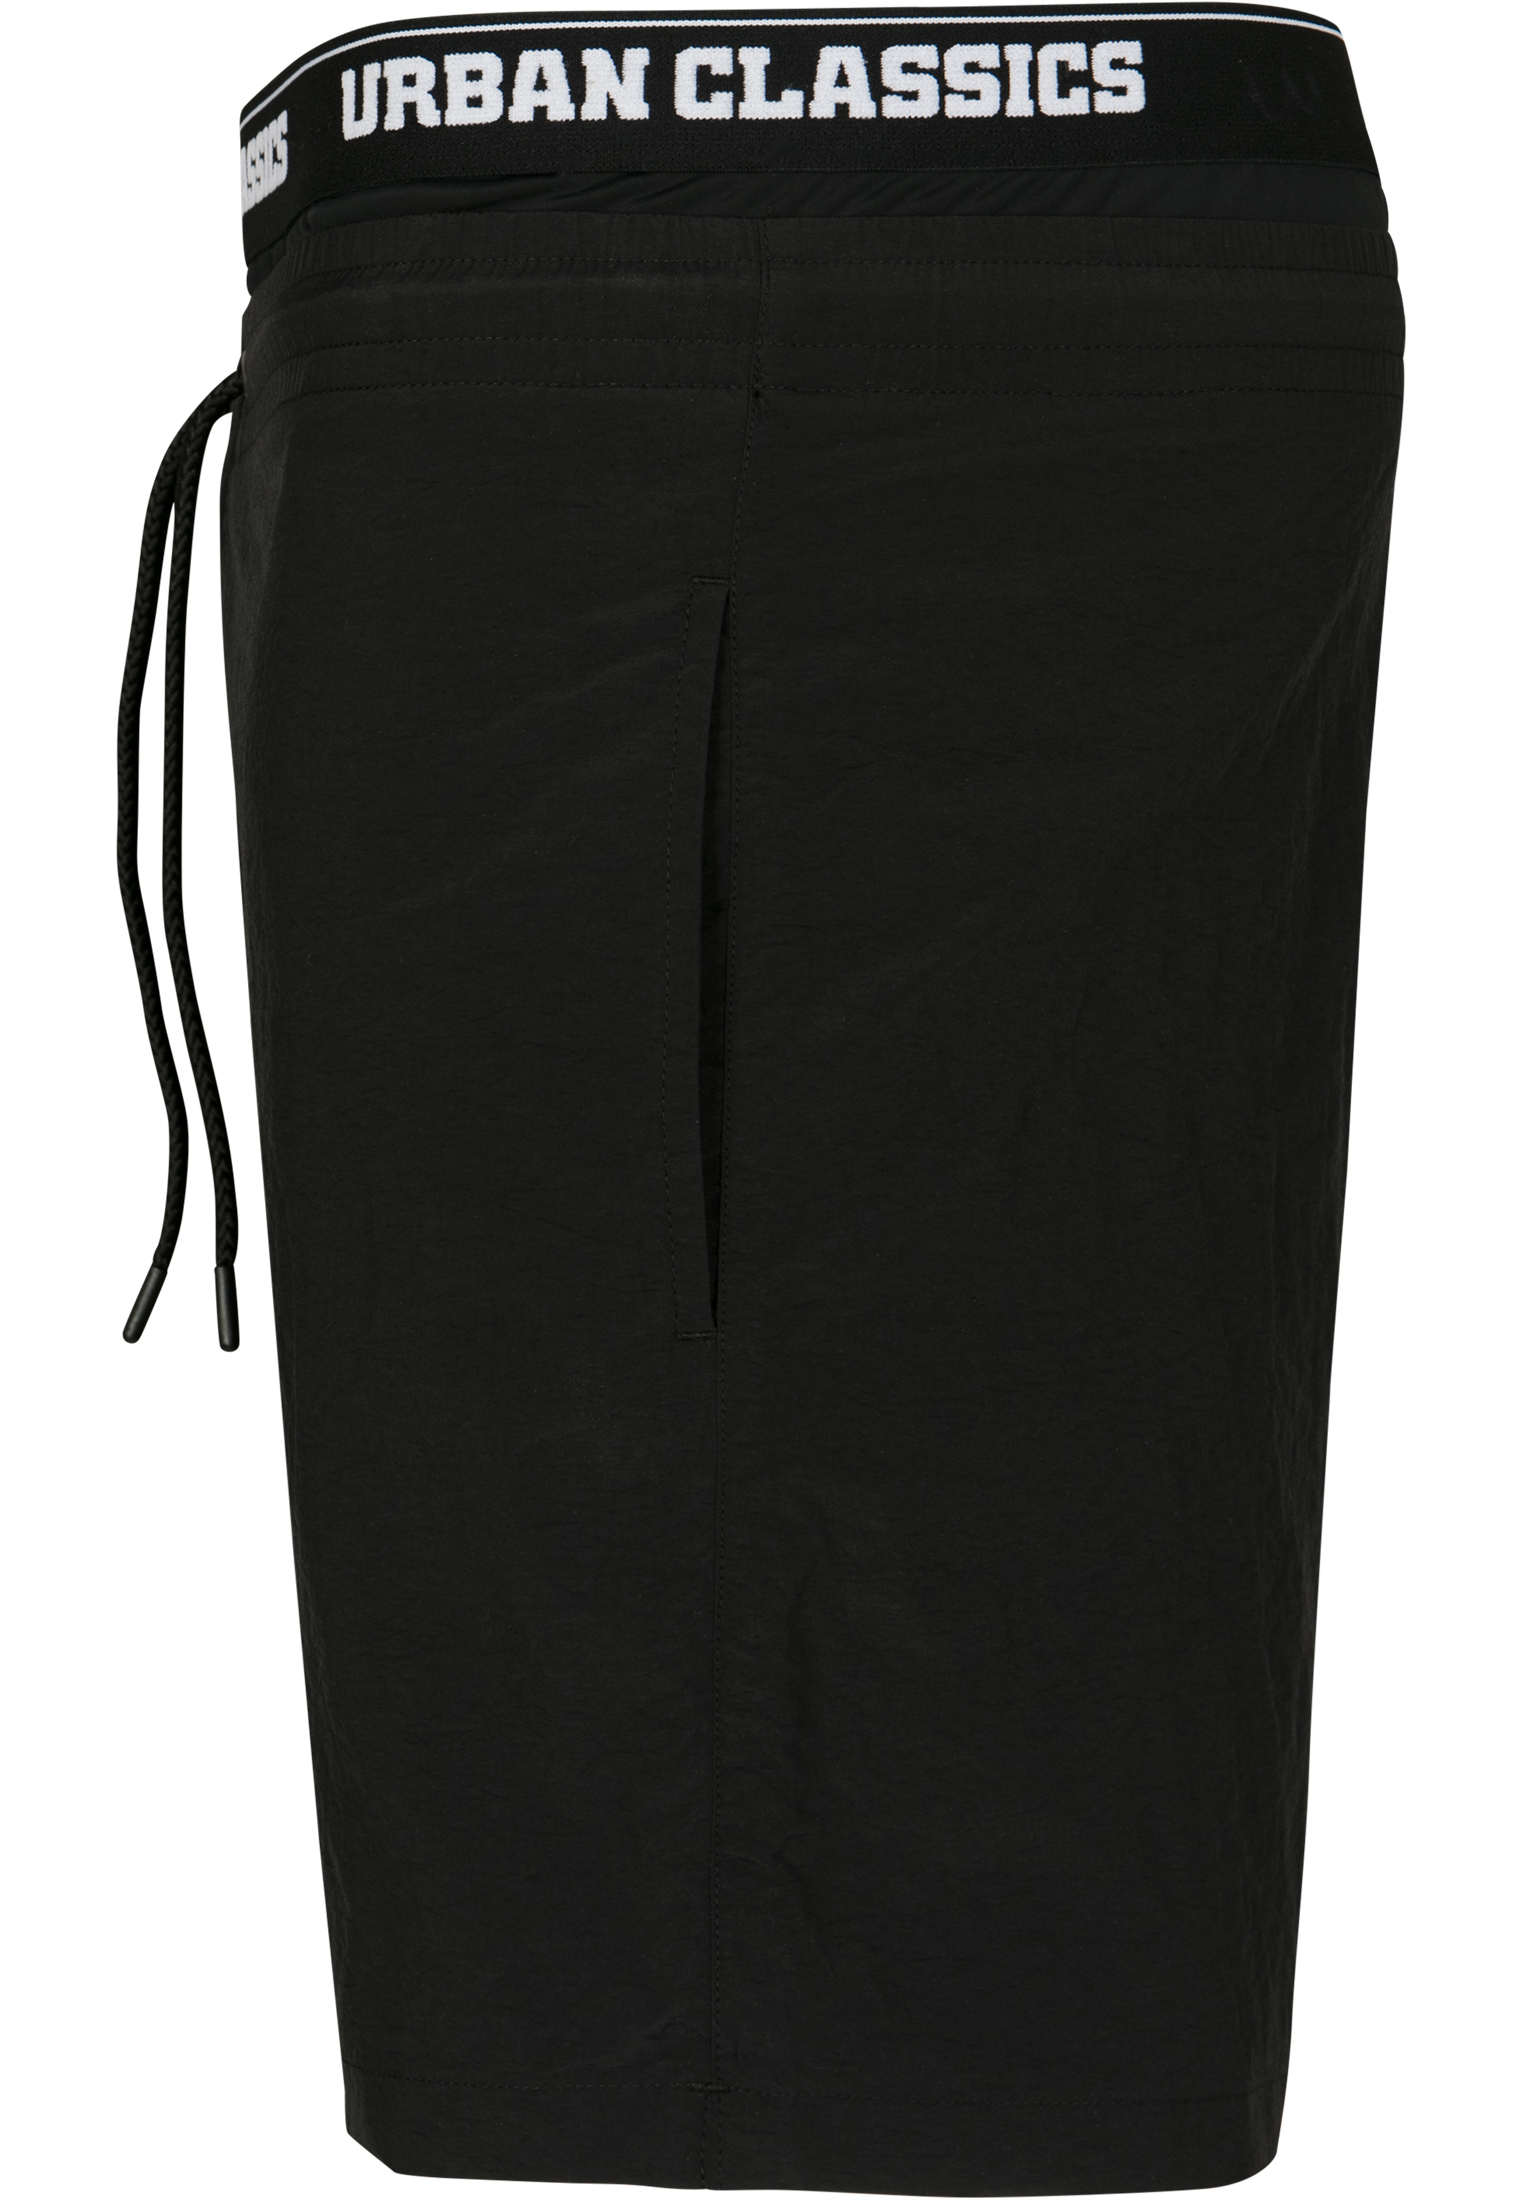 Bademode Two in One Swim Shorts in Farbe blk/blk/wht